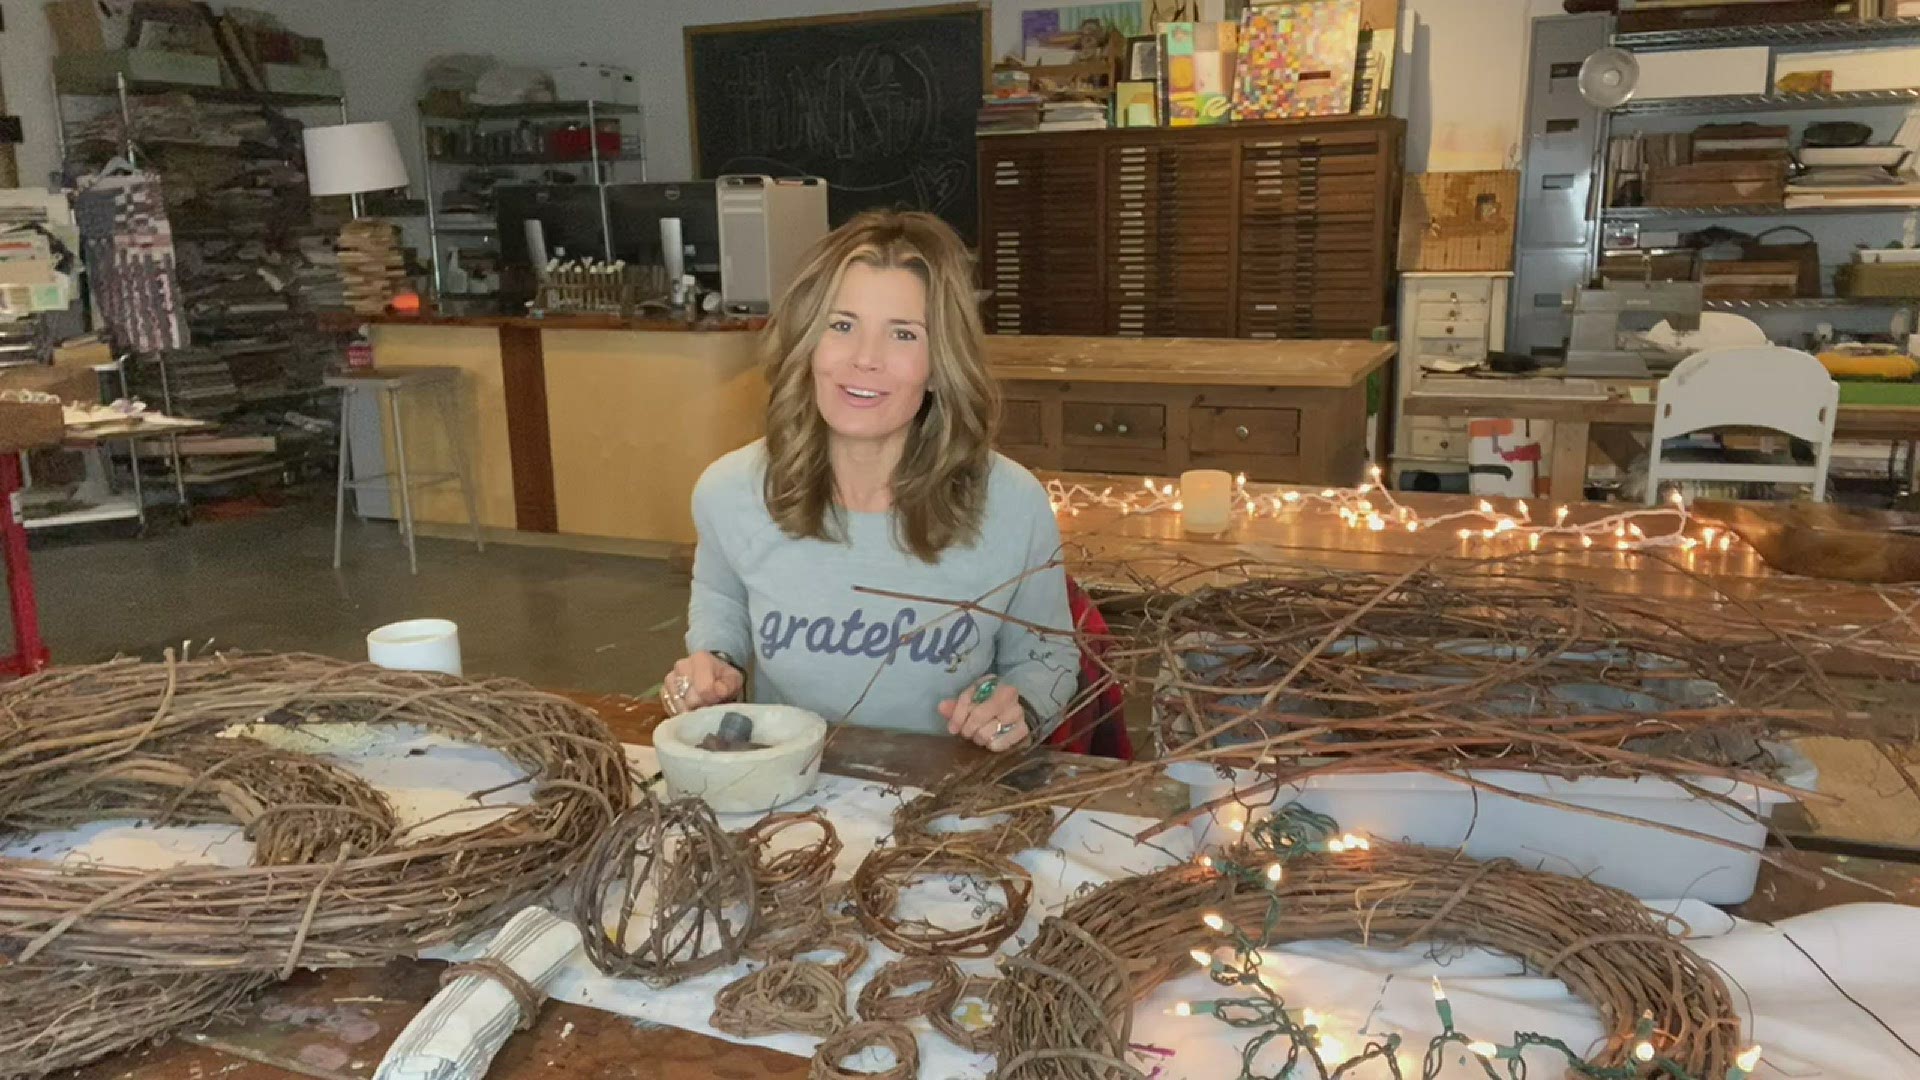 Tis the season to be thankful! Follow along with Iowa Live's Michele Brown for the latest do-it-yourself project.